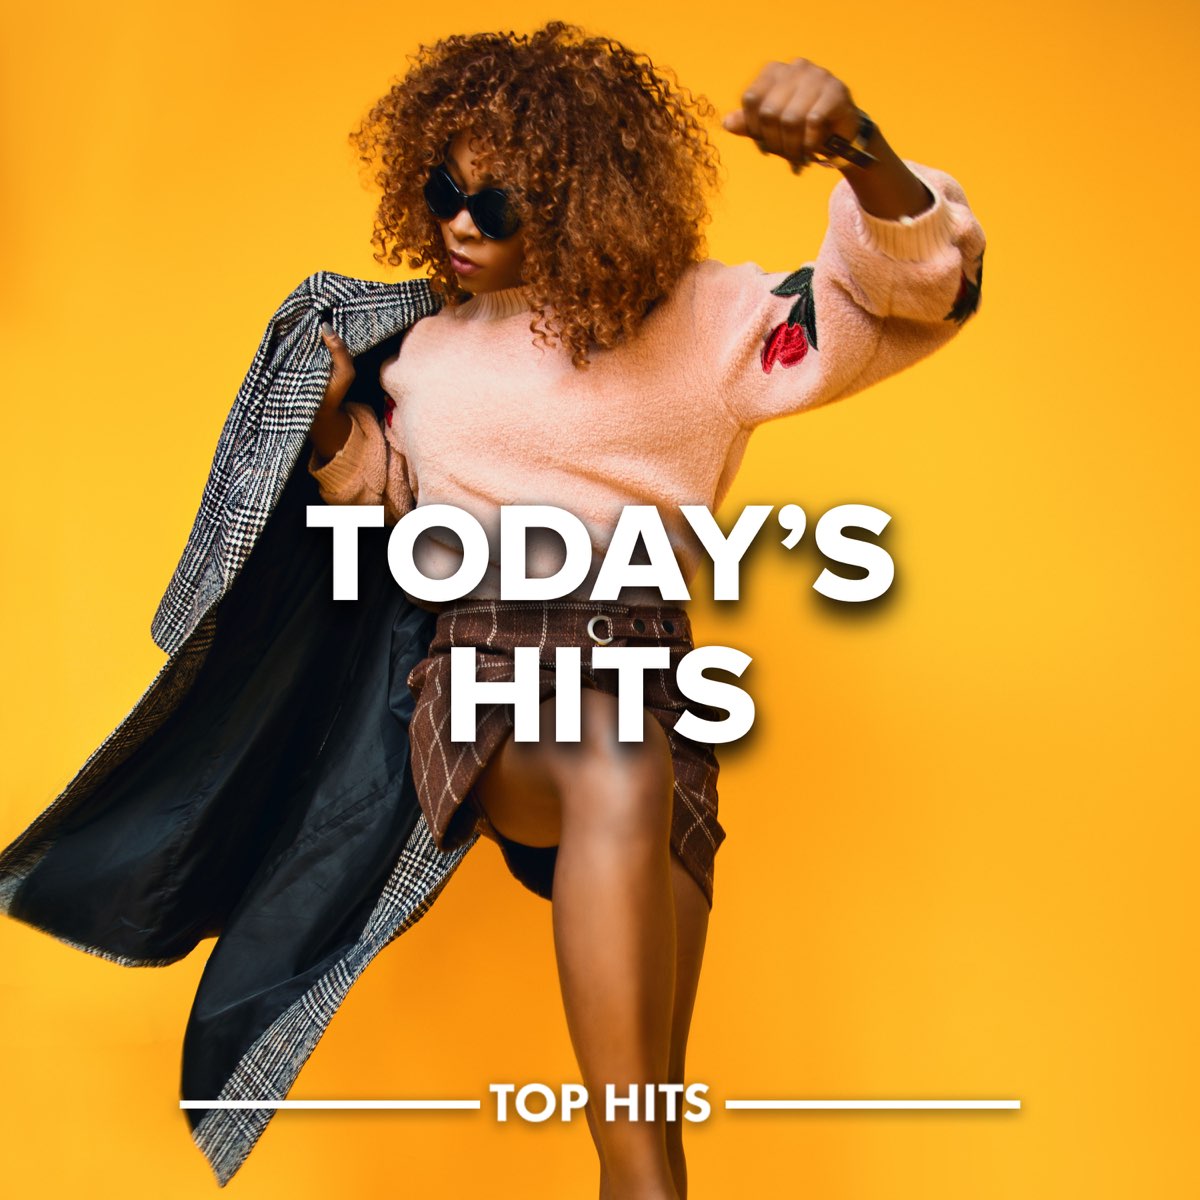 ‎Todays Hits by Various Artists on Apple Music